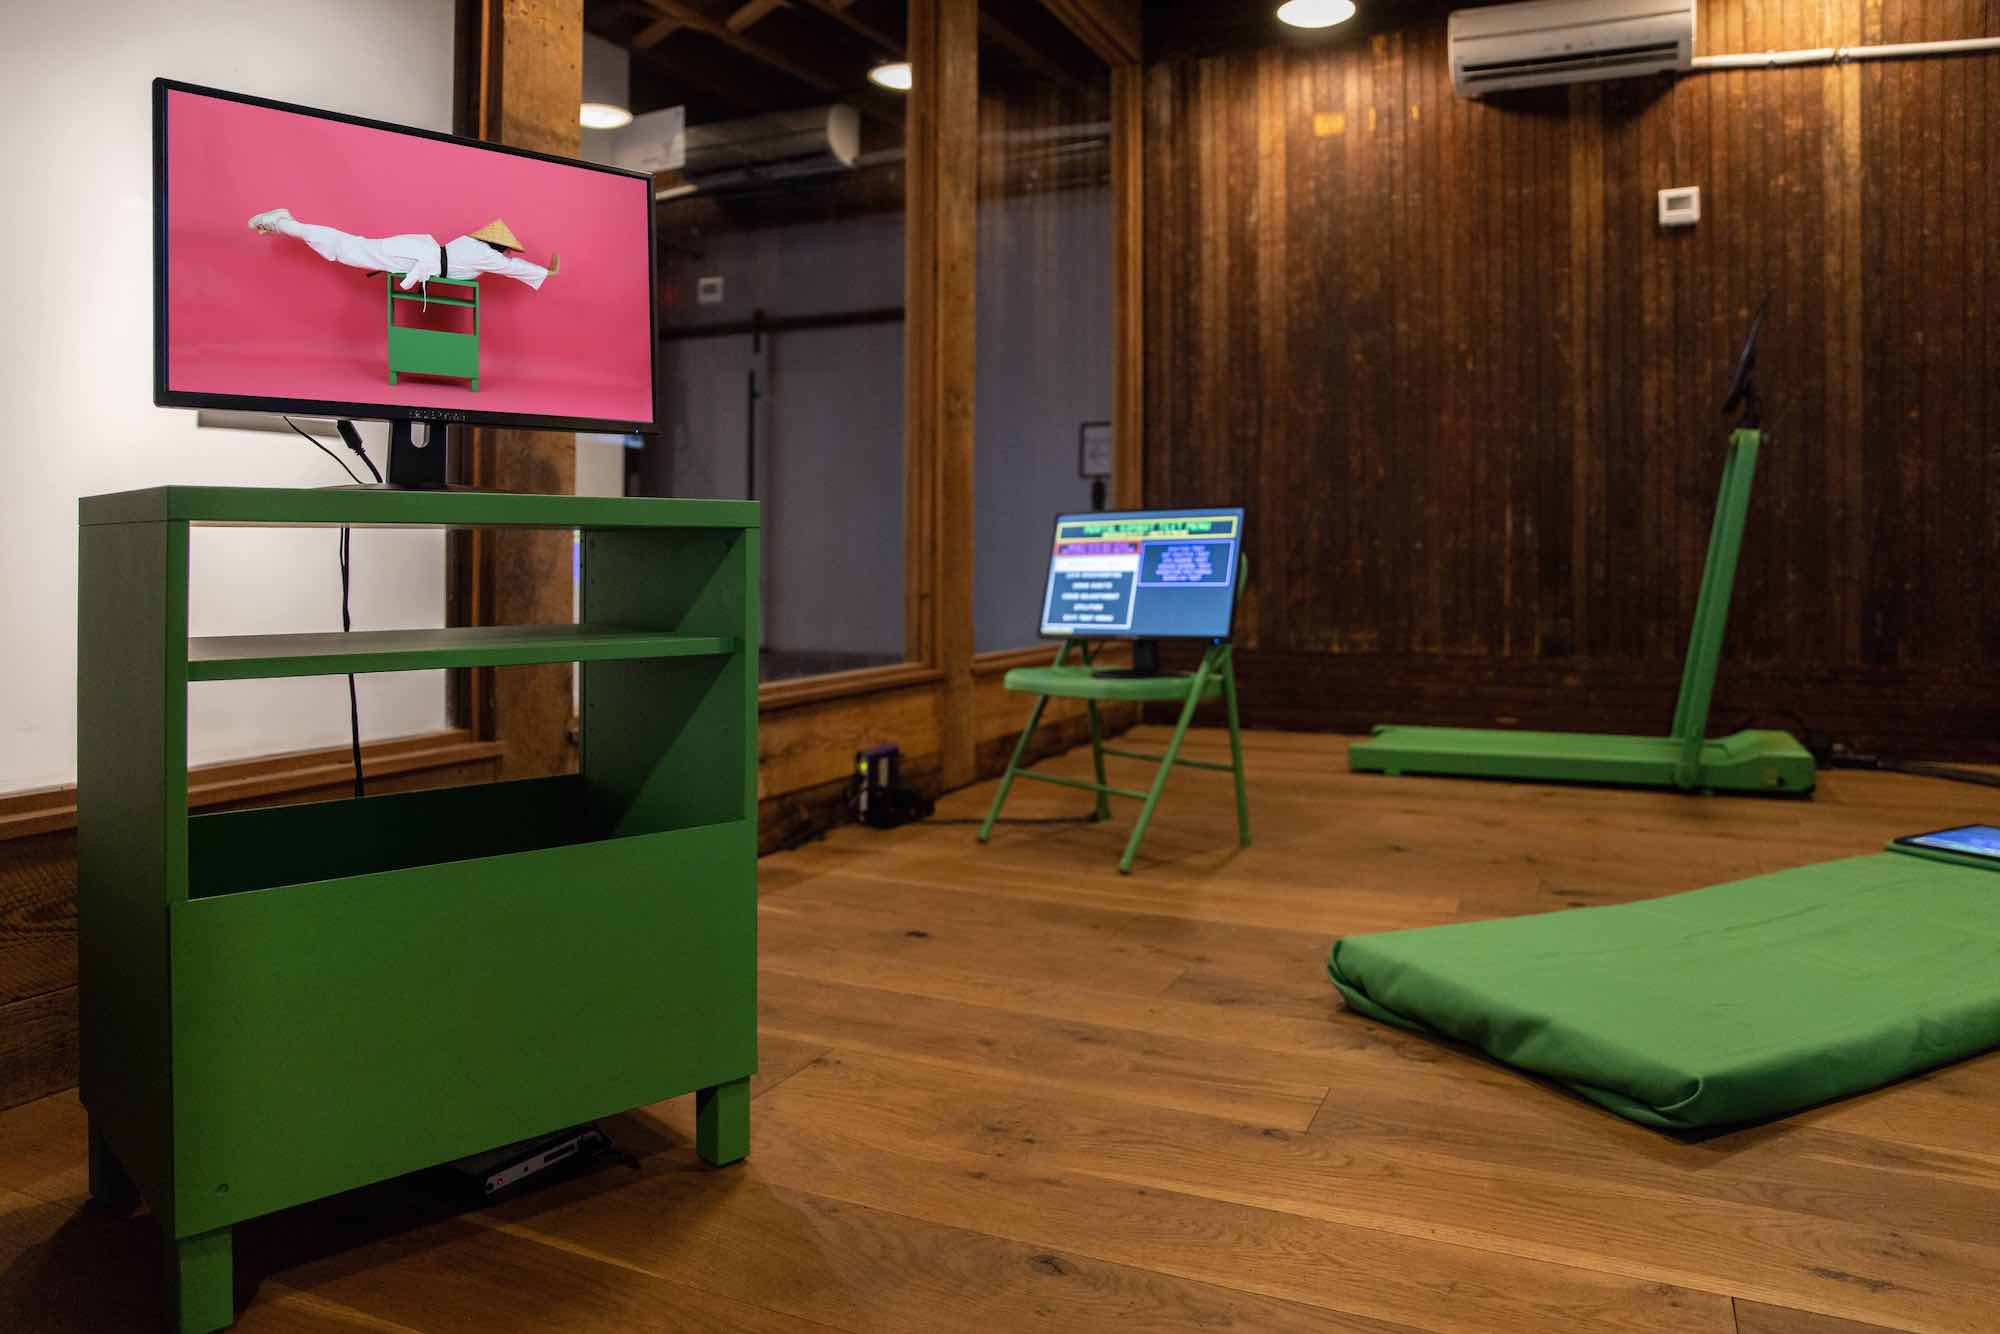 A room with chroma-key green furniture, each with a video monitor atop. The monitor in the foreground shows an image of a pink background with the artist laying belly down, outstretched on a green table wearing a white outfit and an Asian conical hat